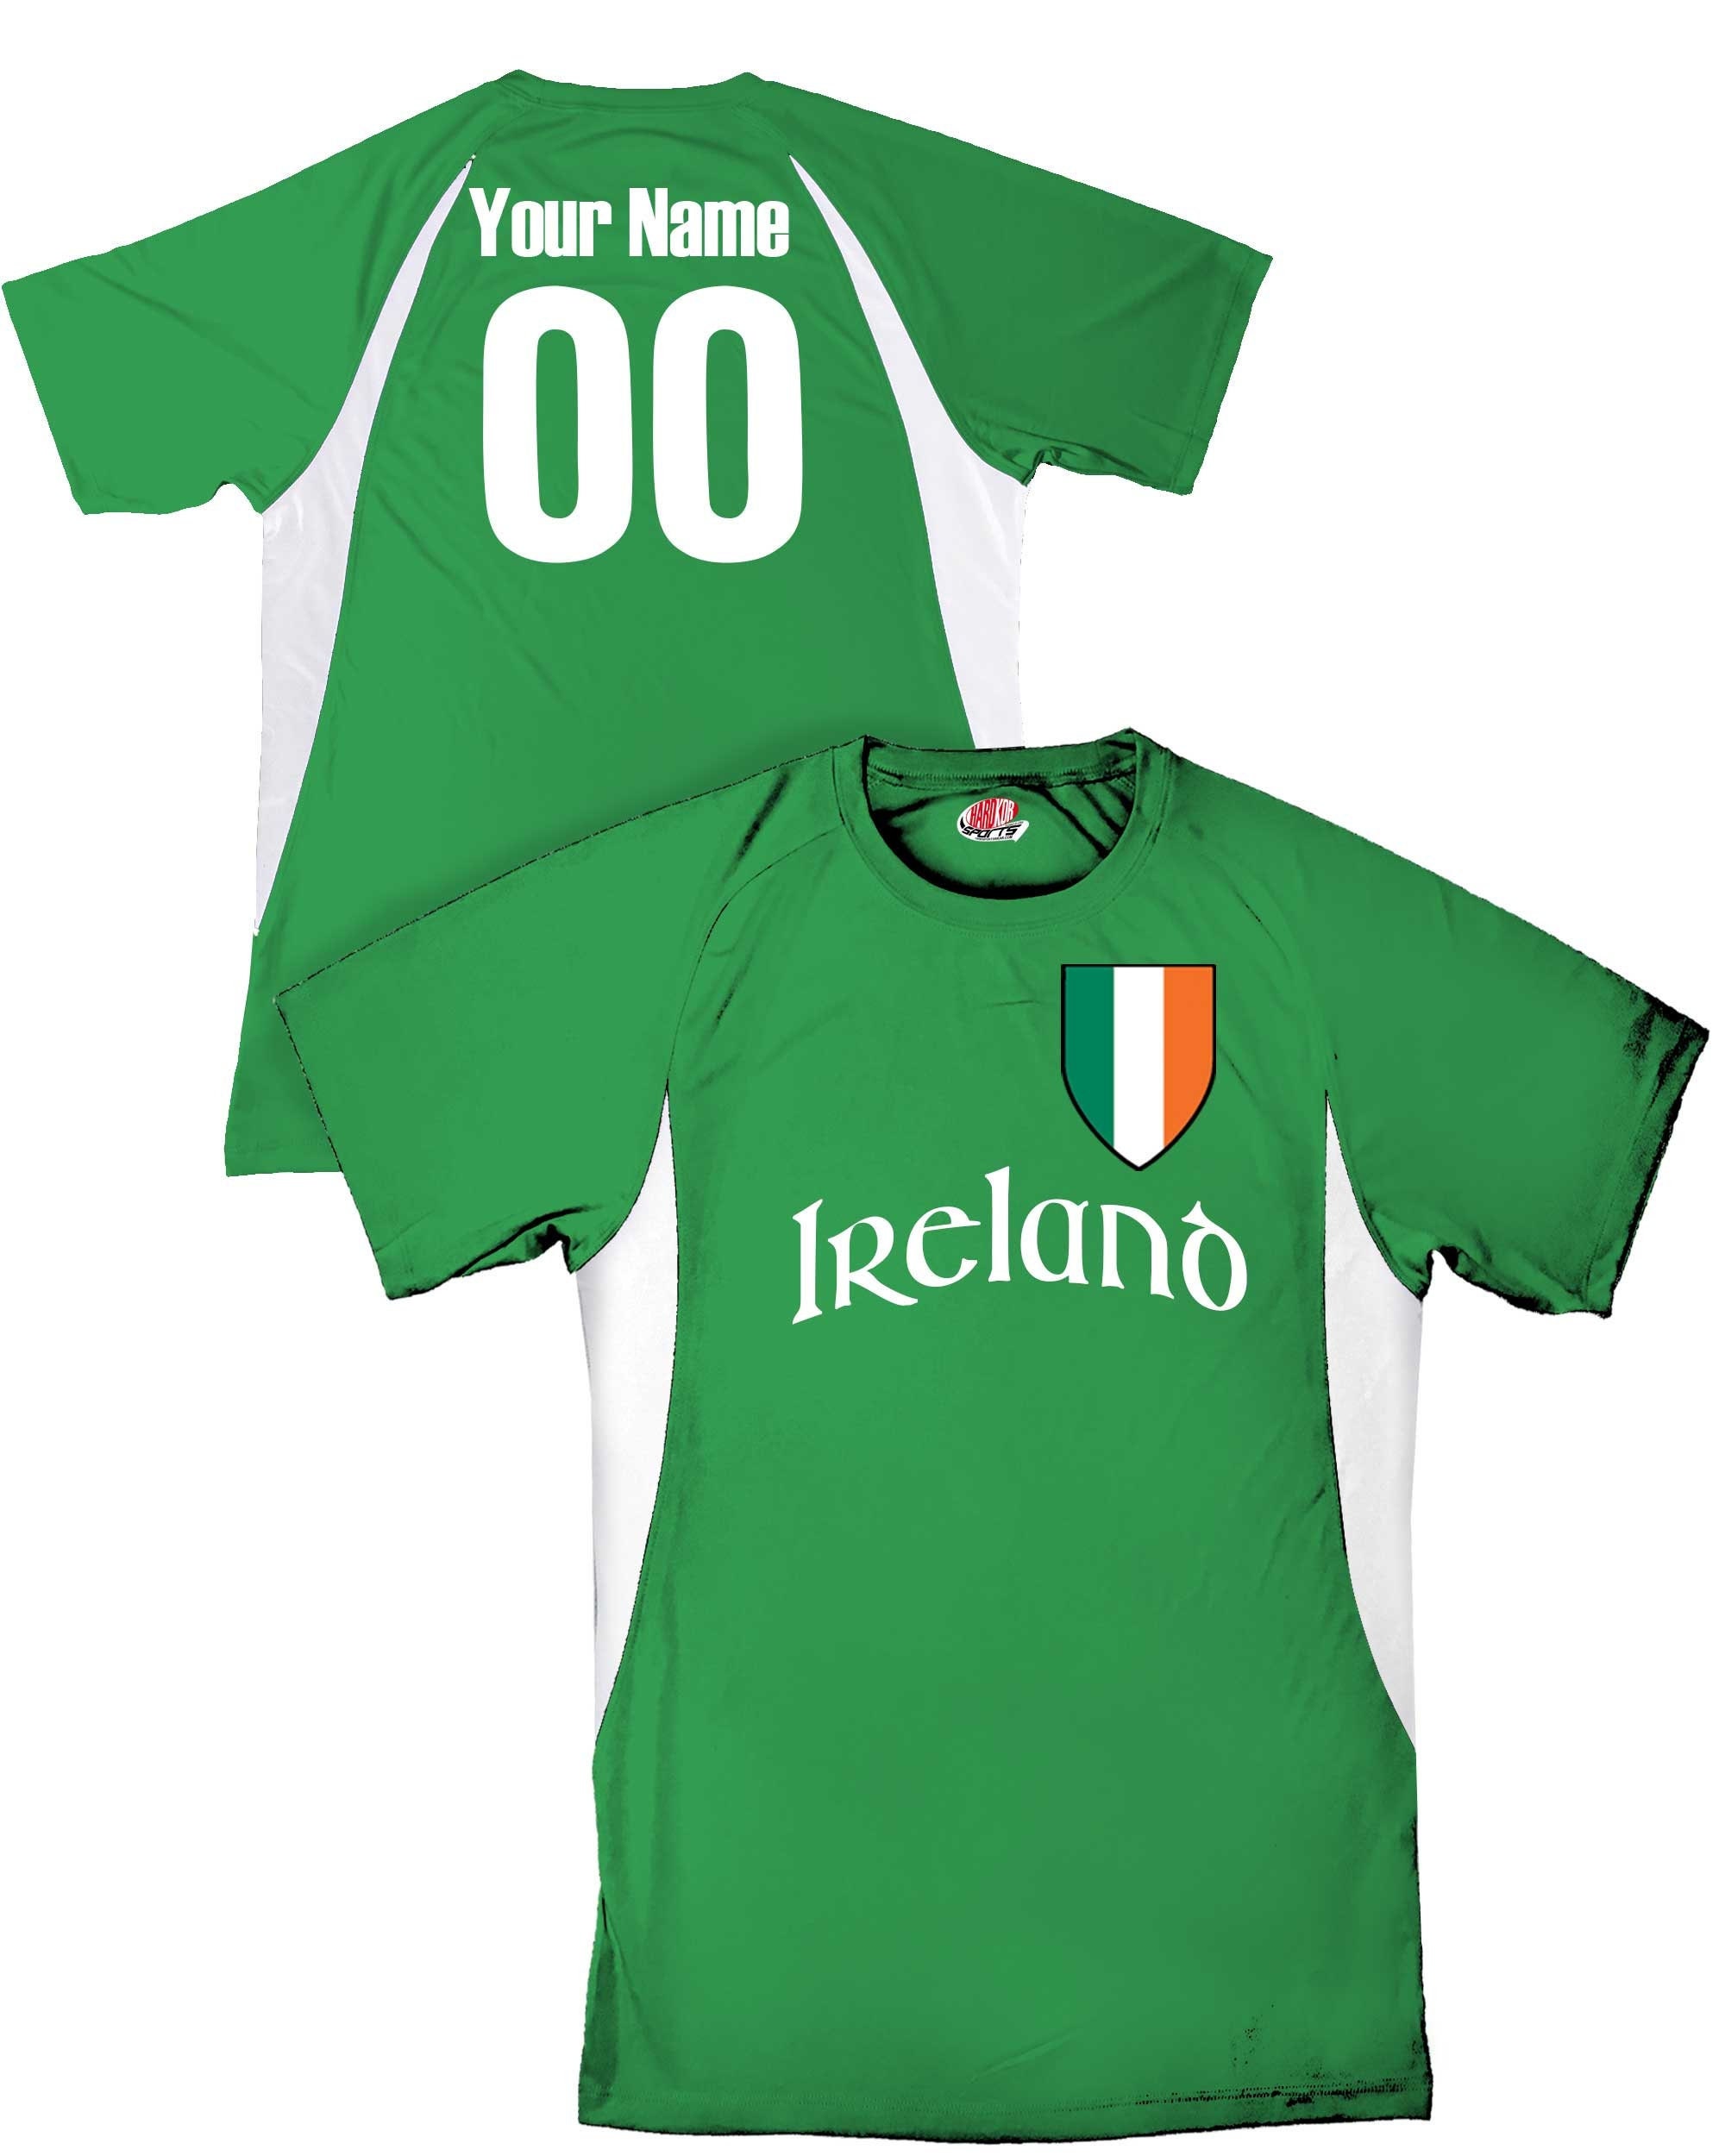 HKsportswear Custom Ireland Soccer Jersey with Irish Flag Shield Design | Personalized with Your Name and Number in Your Choice of Colors